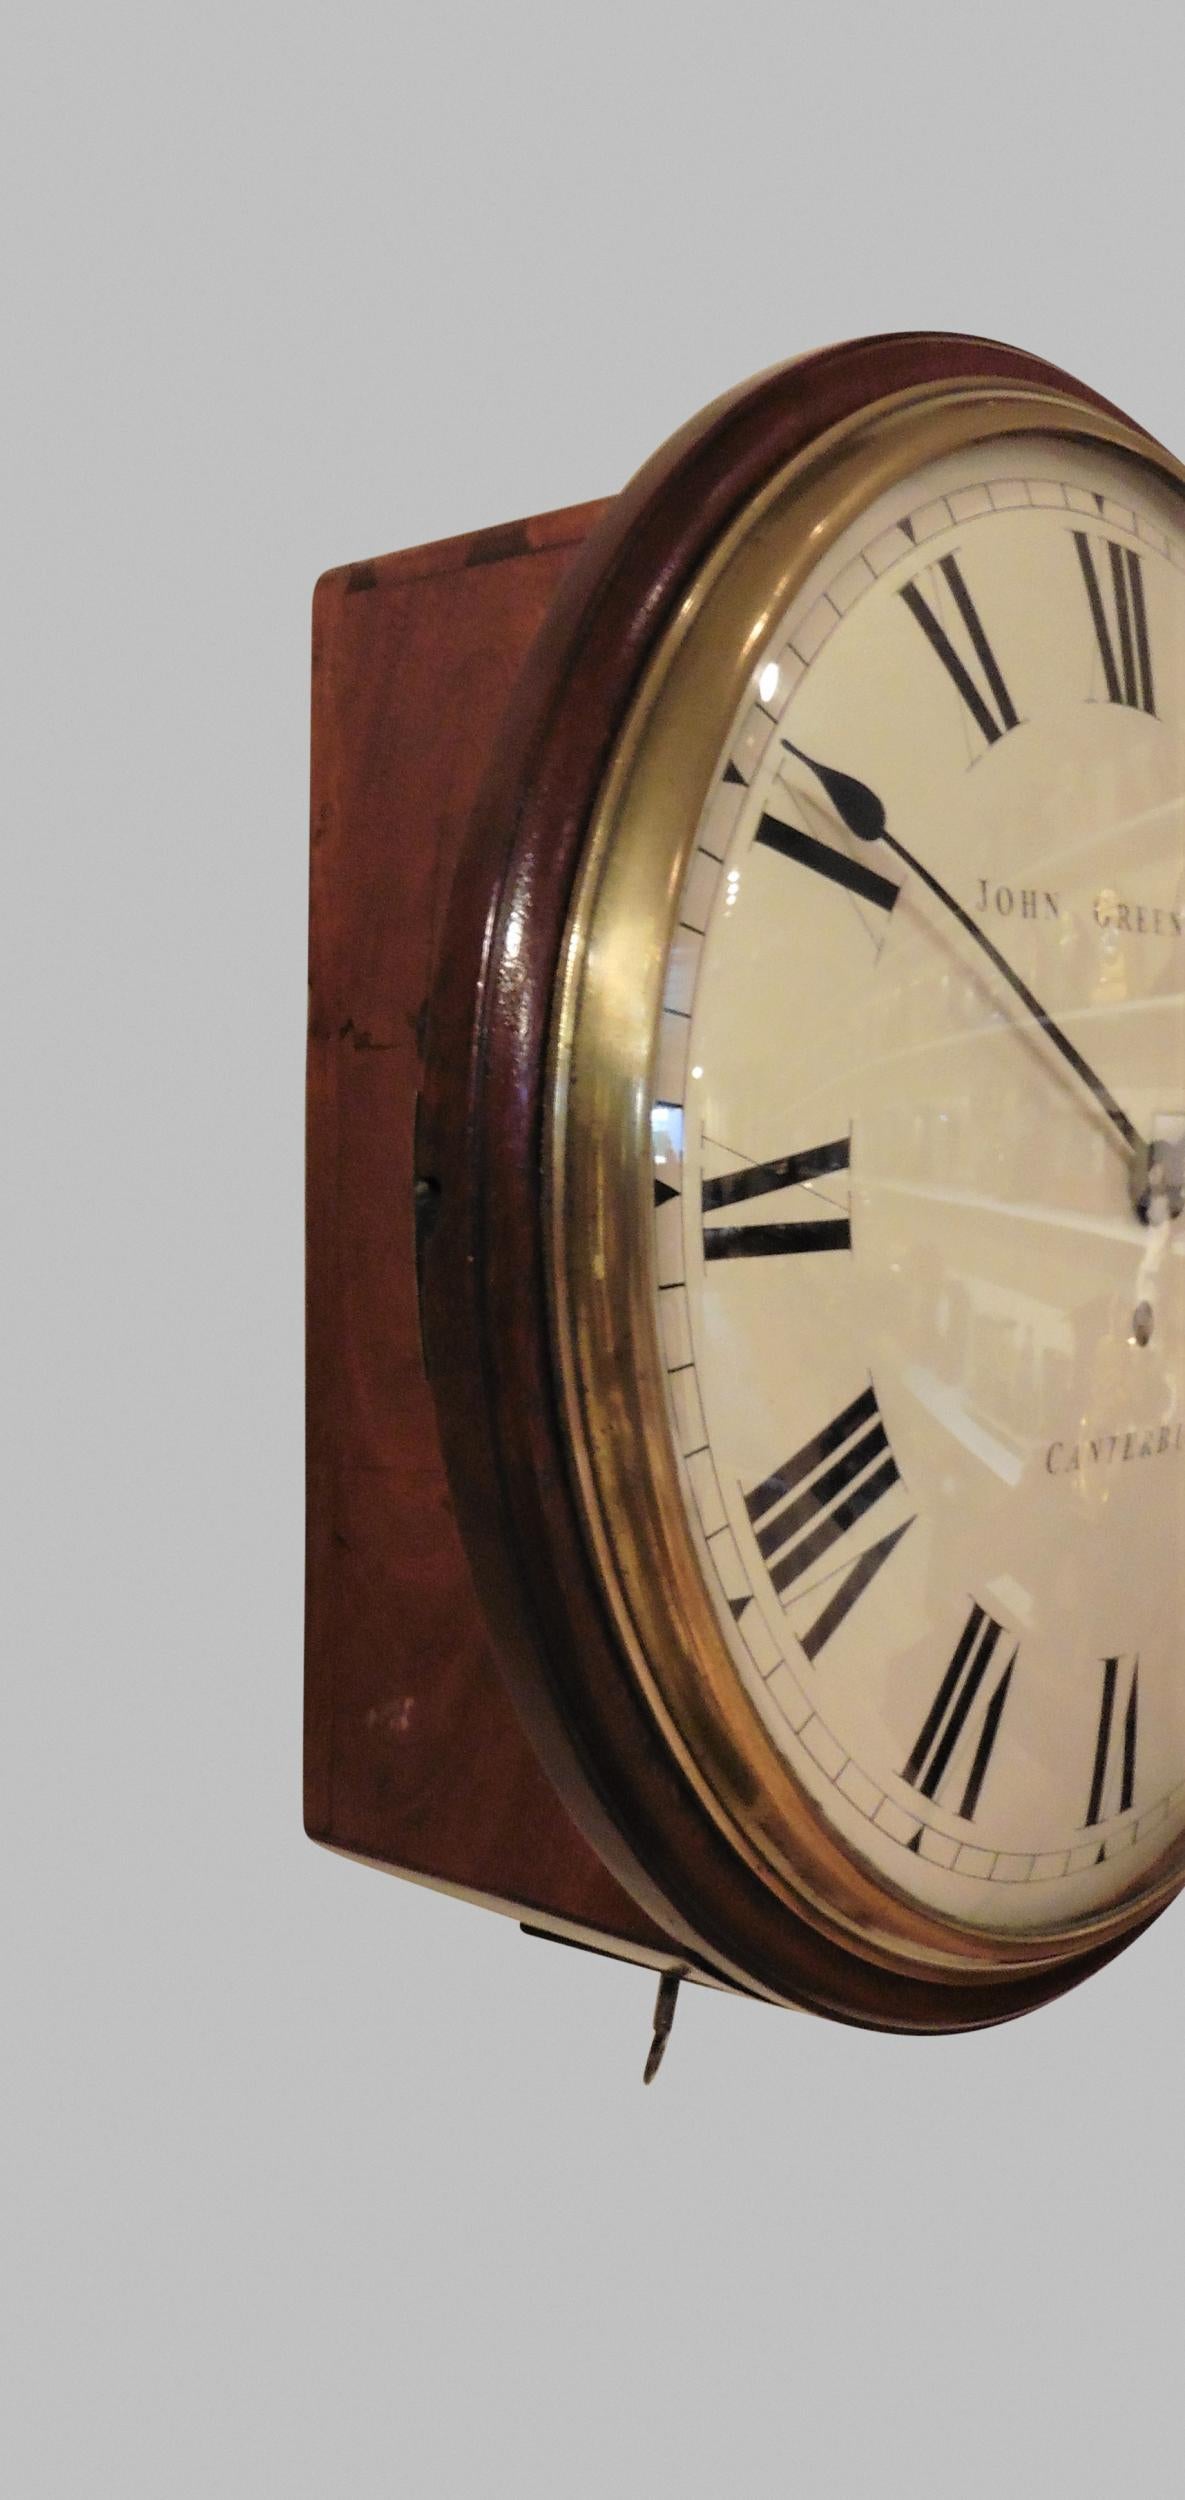 English round dial wall clock by John Greenwood, Canterbury



Round dial wall clock with slim mahogany surround. 

Heavy cast brass bezel opening to a painted dial with Roman numerals and original finely cut ‘blued’ steel spade hands signed ‘John